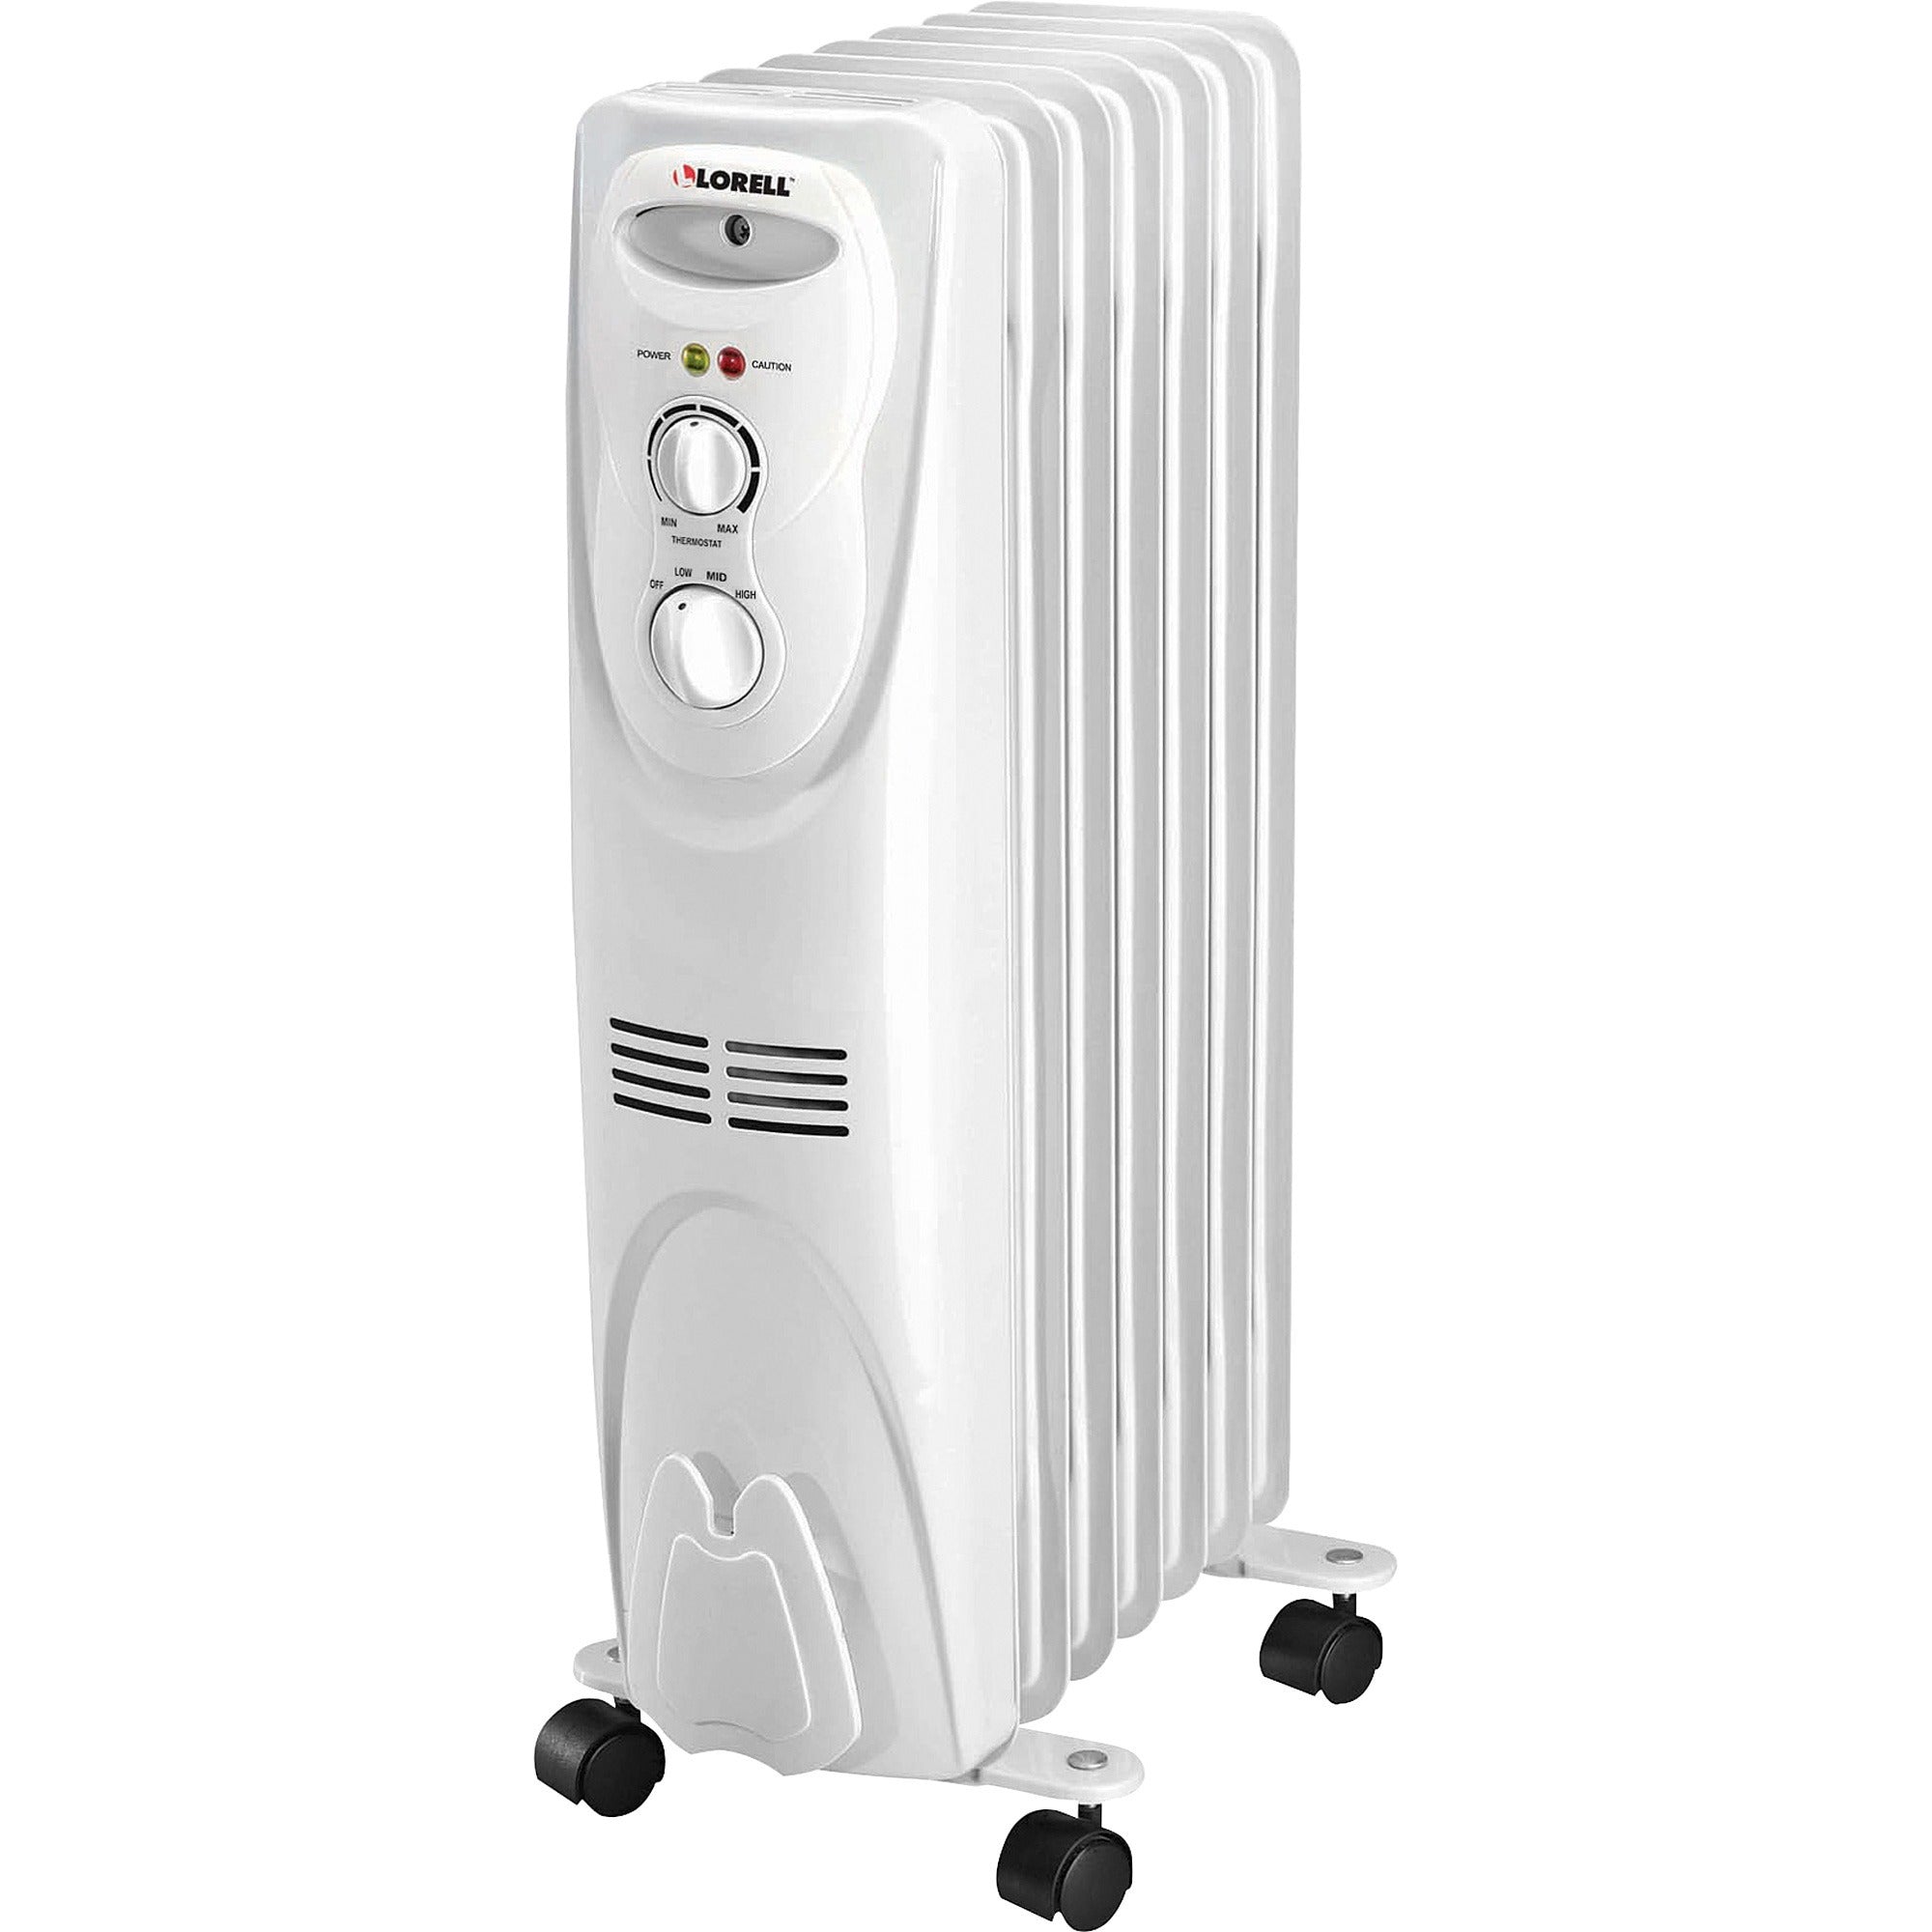 Lorell 3-Setting Oil-Filled Heater - Oil Filled - Electric - 1500 W - 3 x Heat Settings - White - 